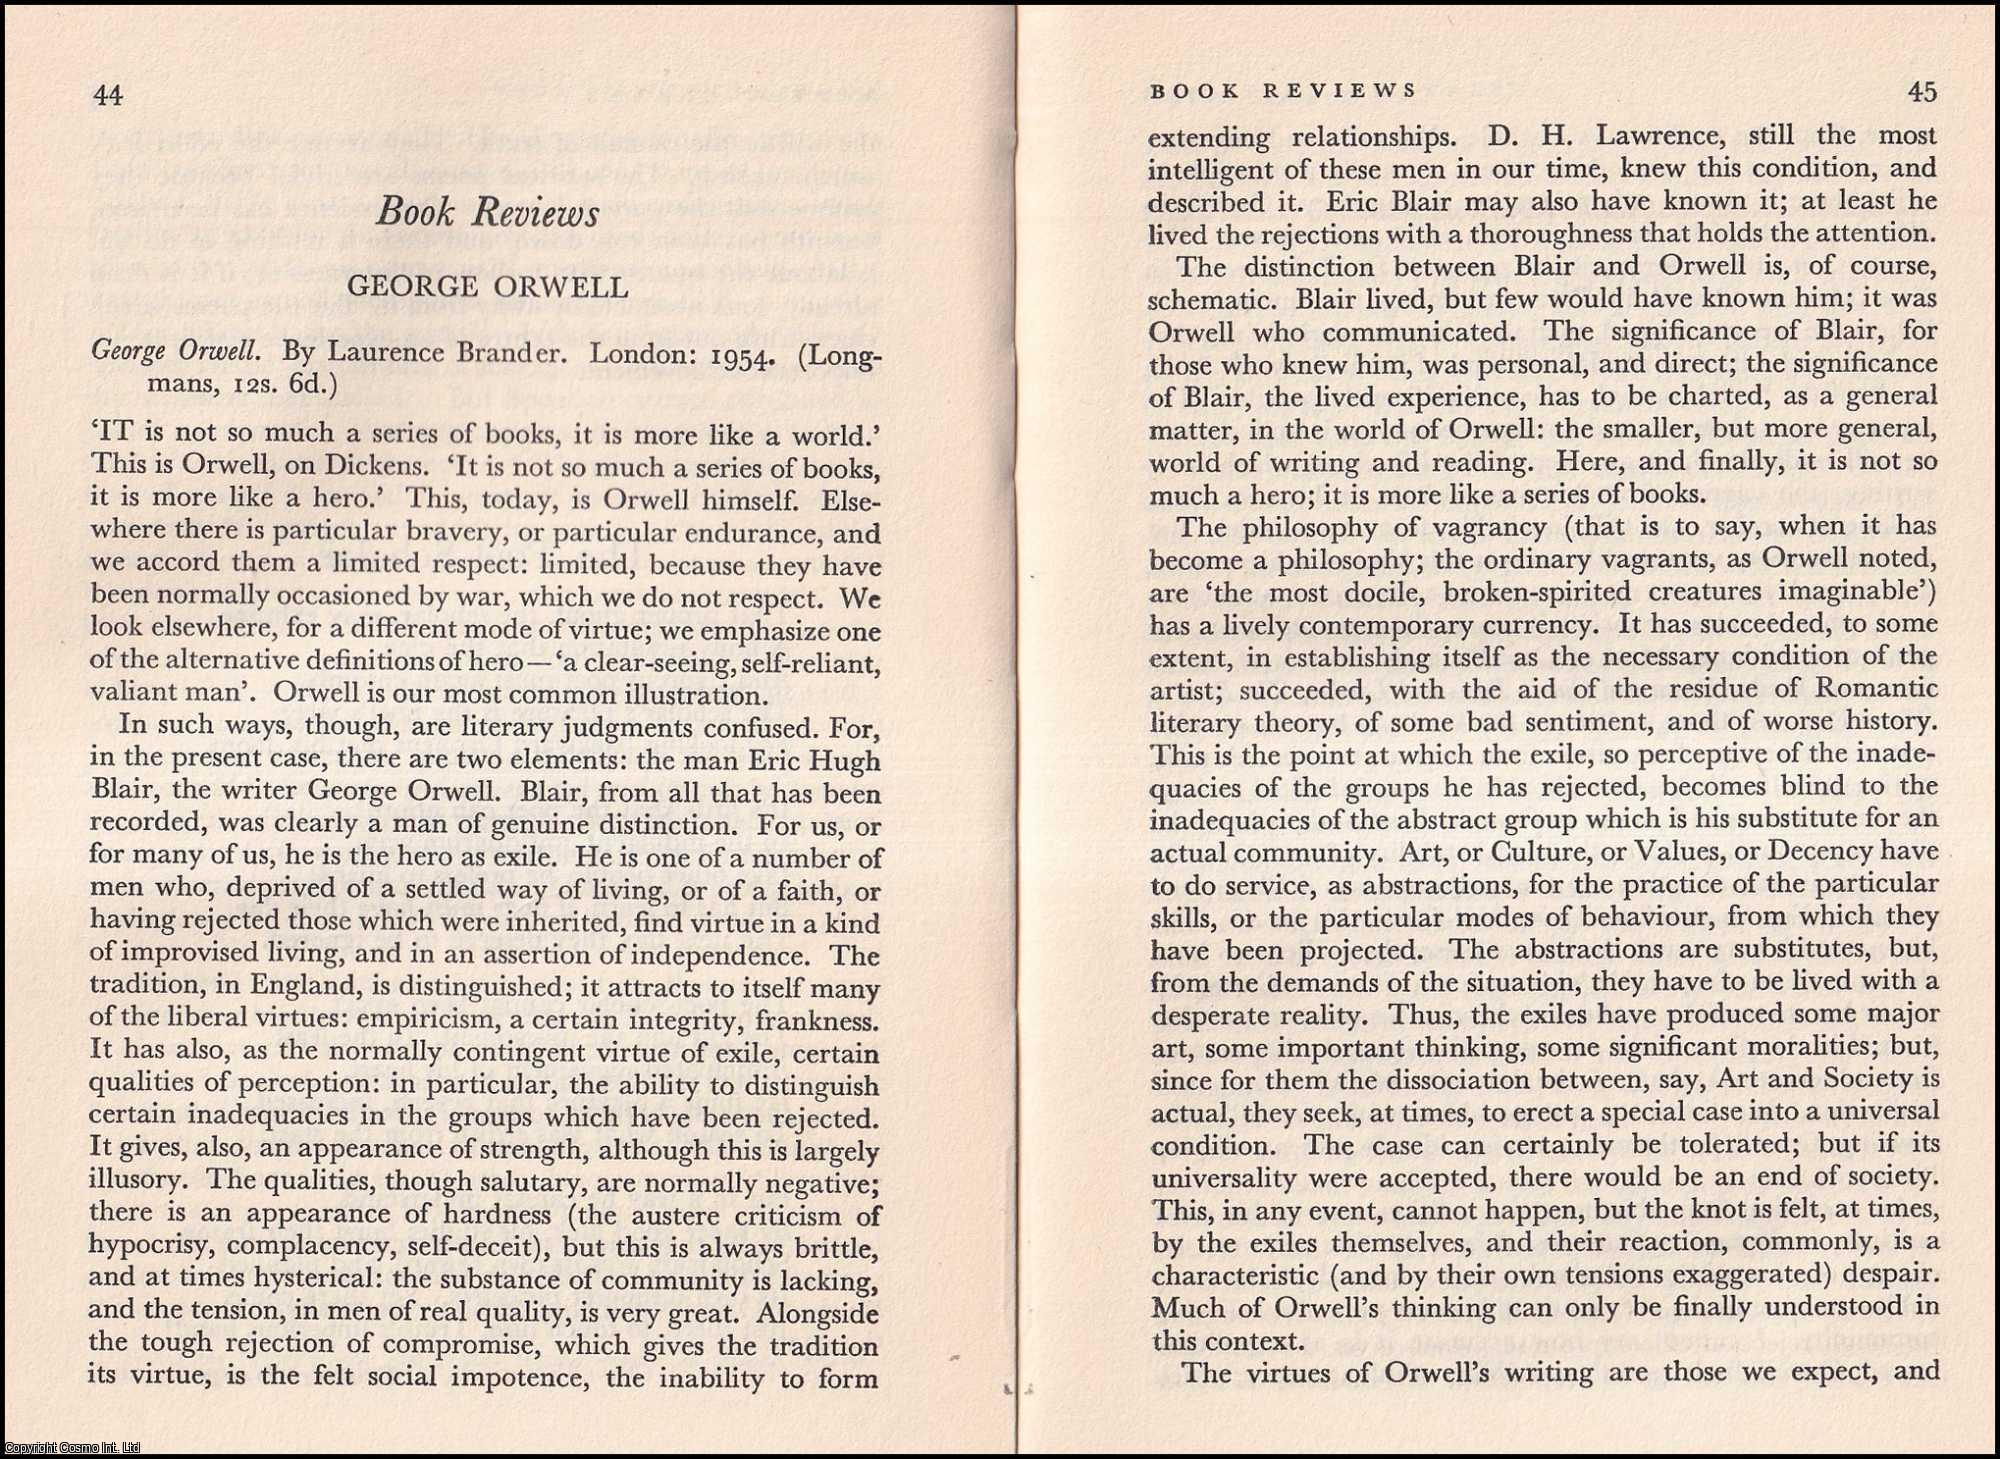 No author stated - Book Reviews: George Orwell. An original article from Essays in Criticism, 1955.